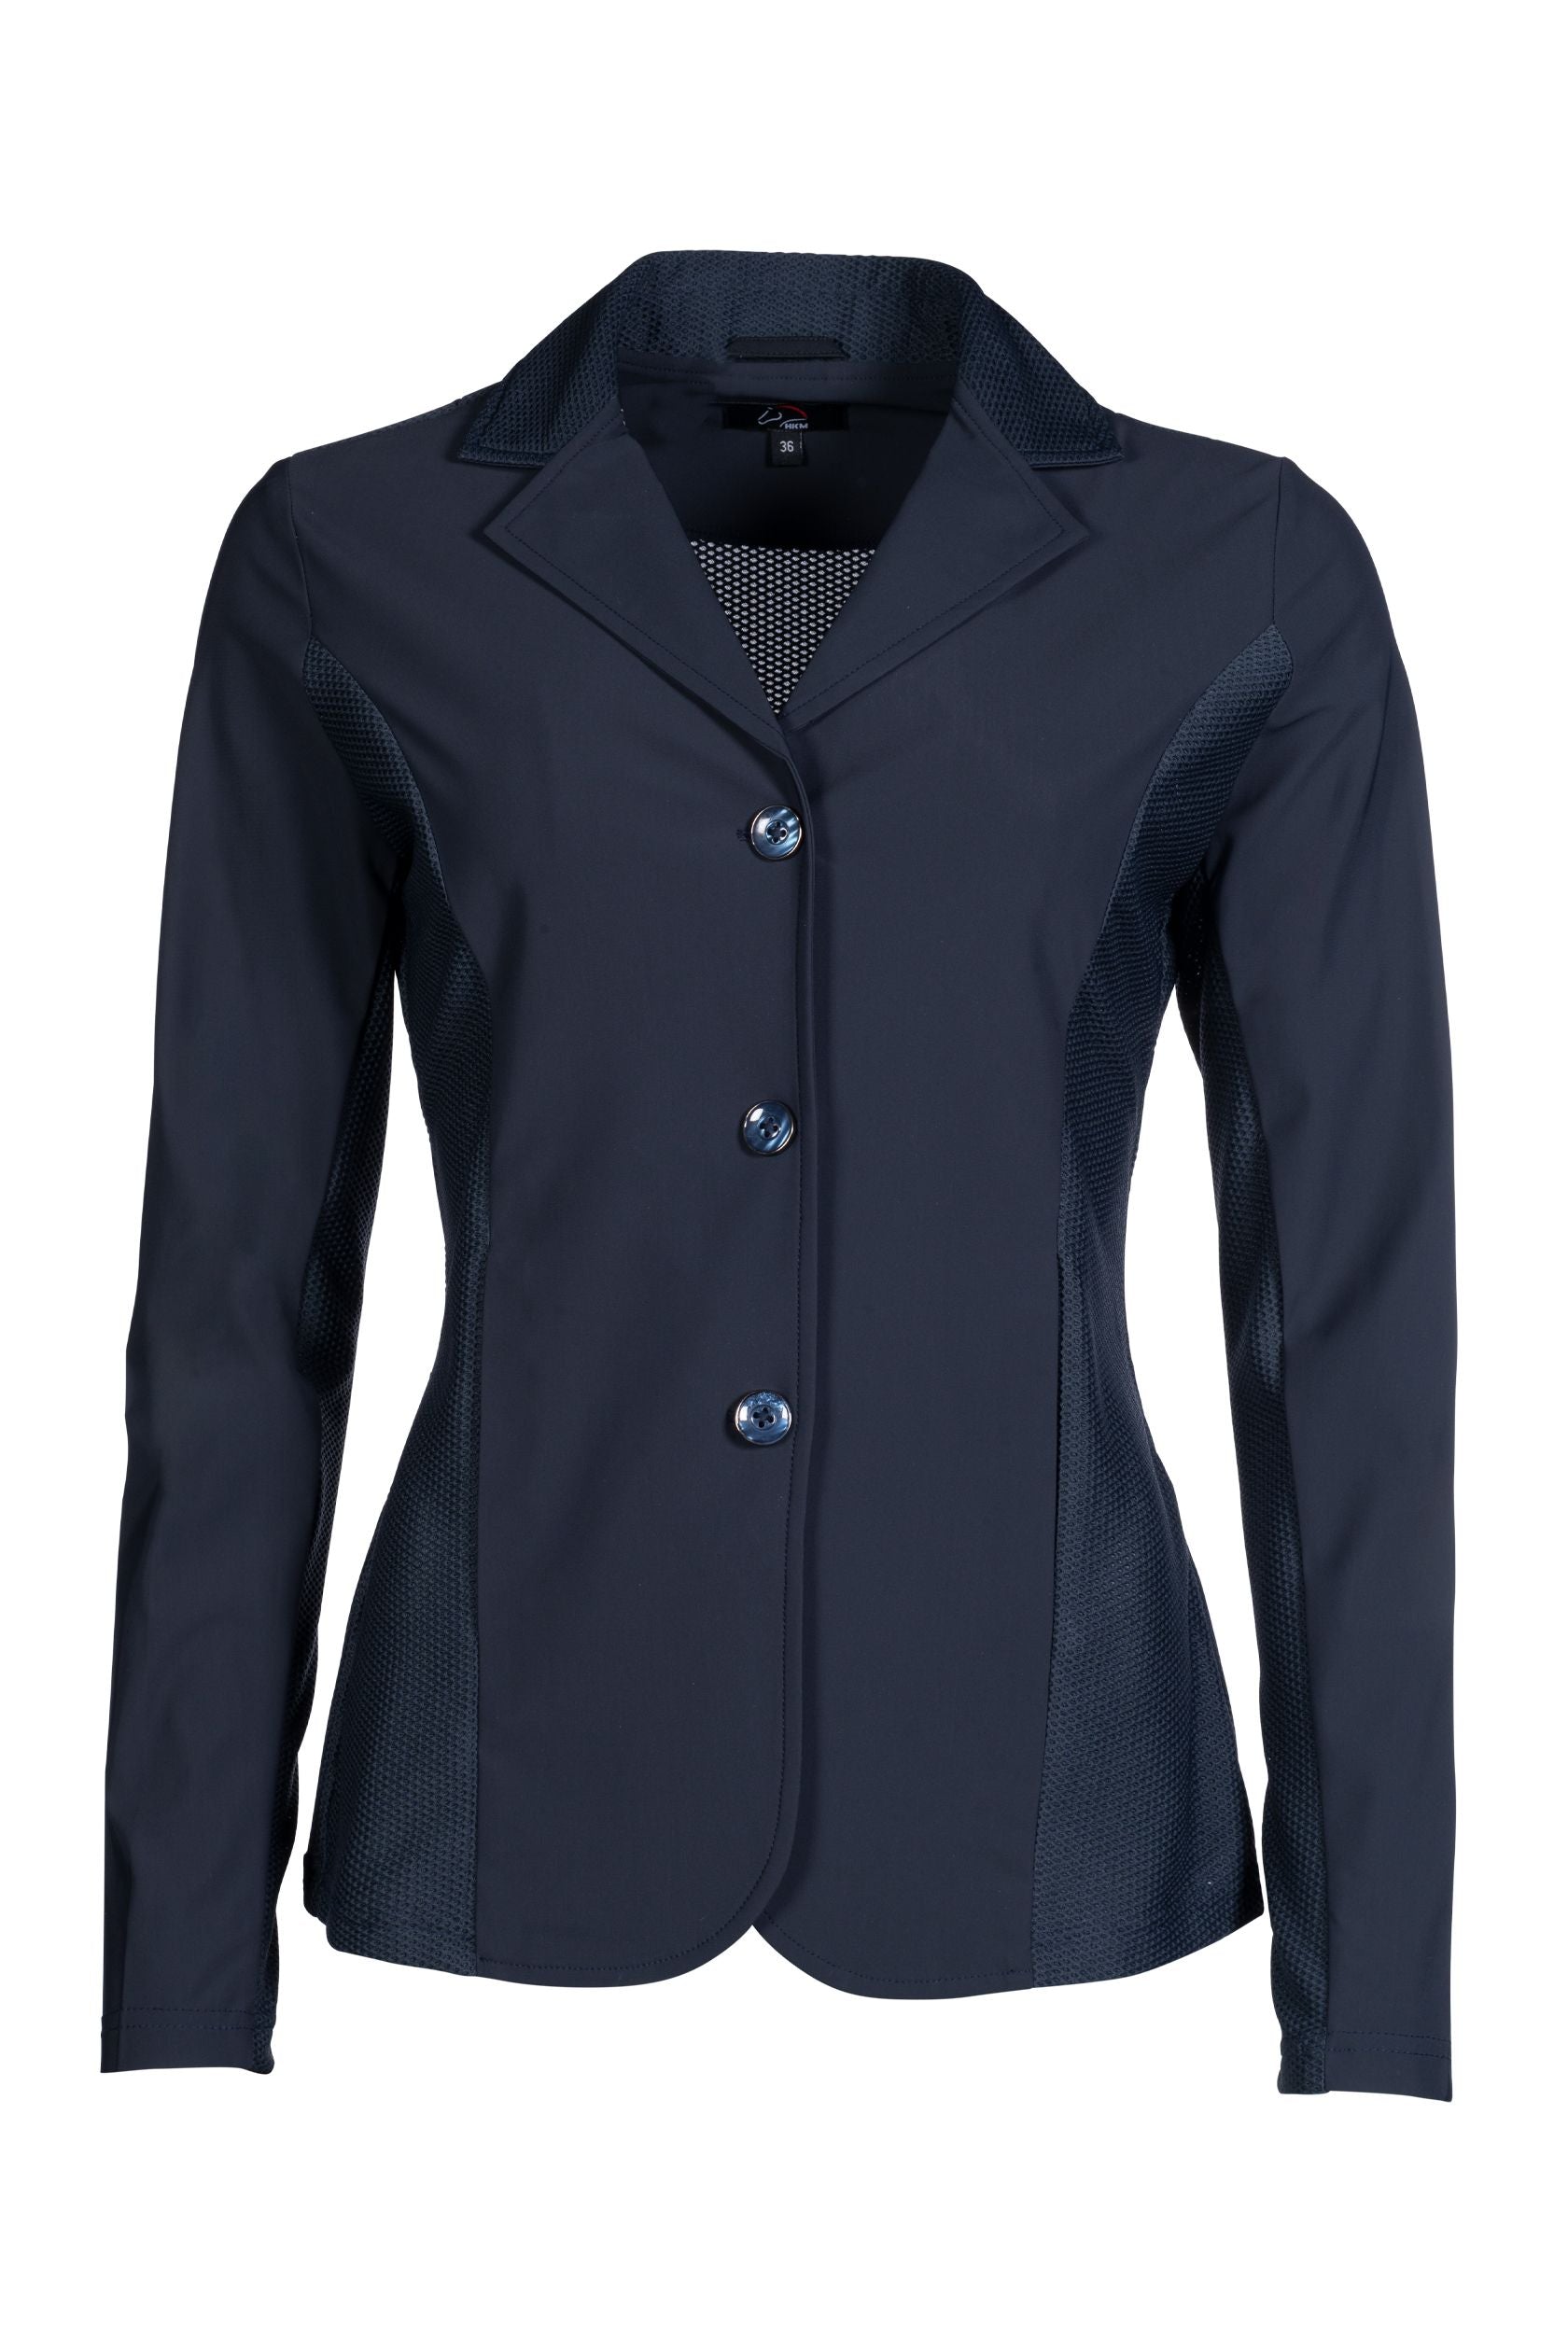 HKM Competition Hunter Slim Fit Women’s Show Jacket